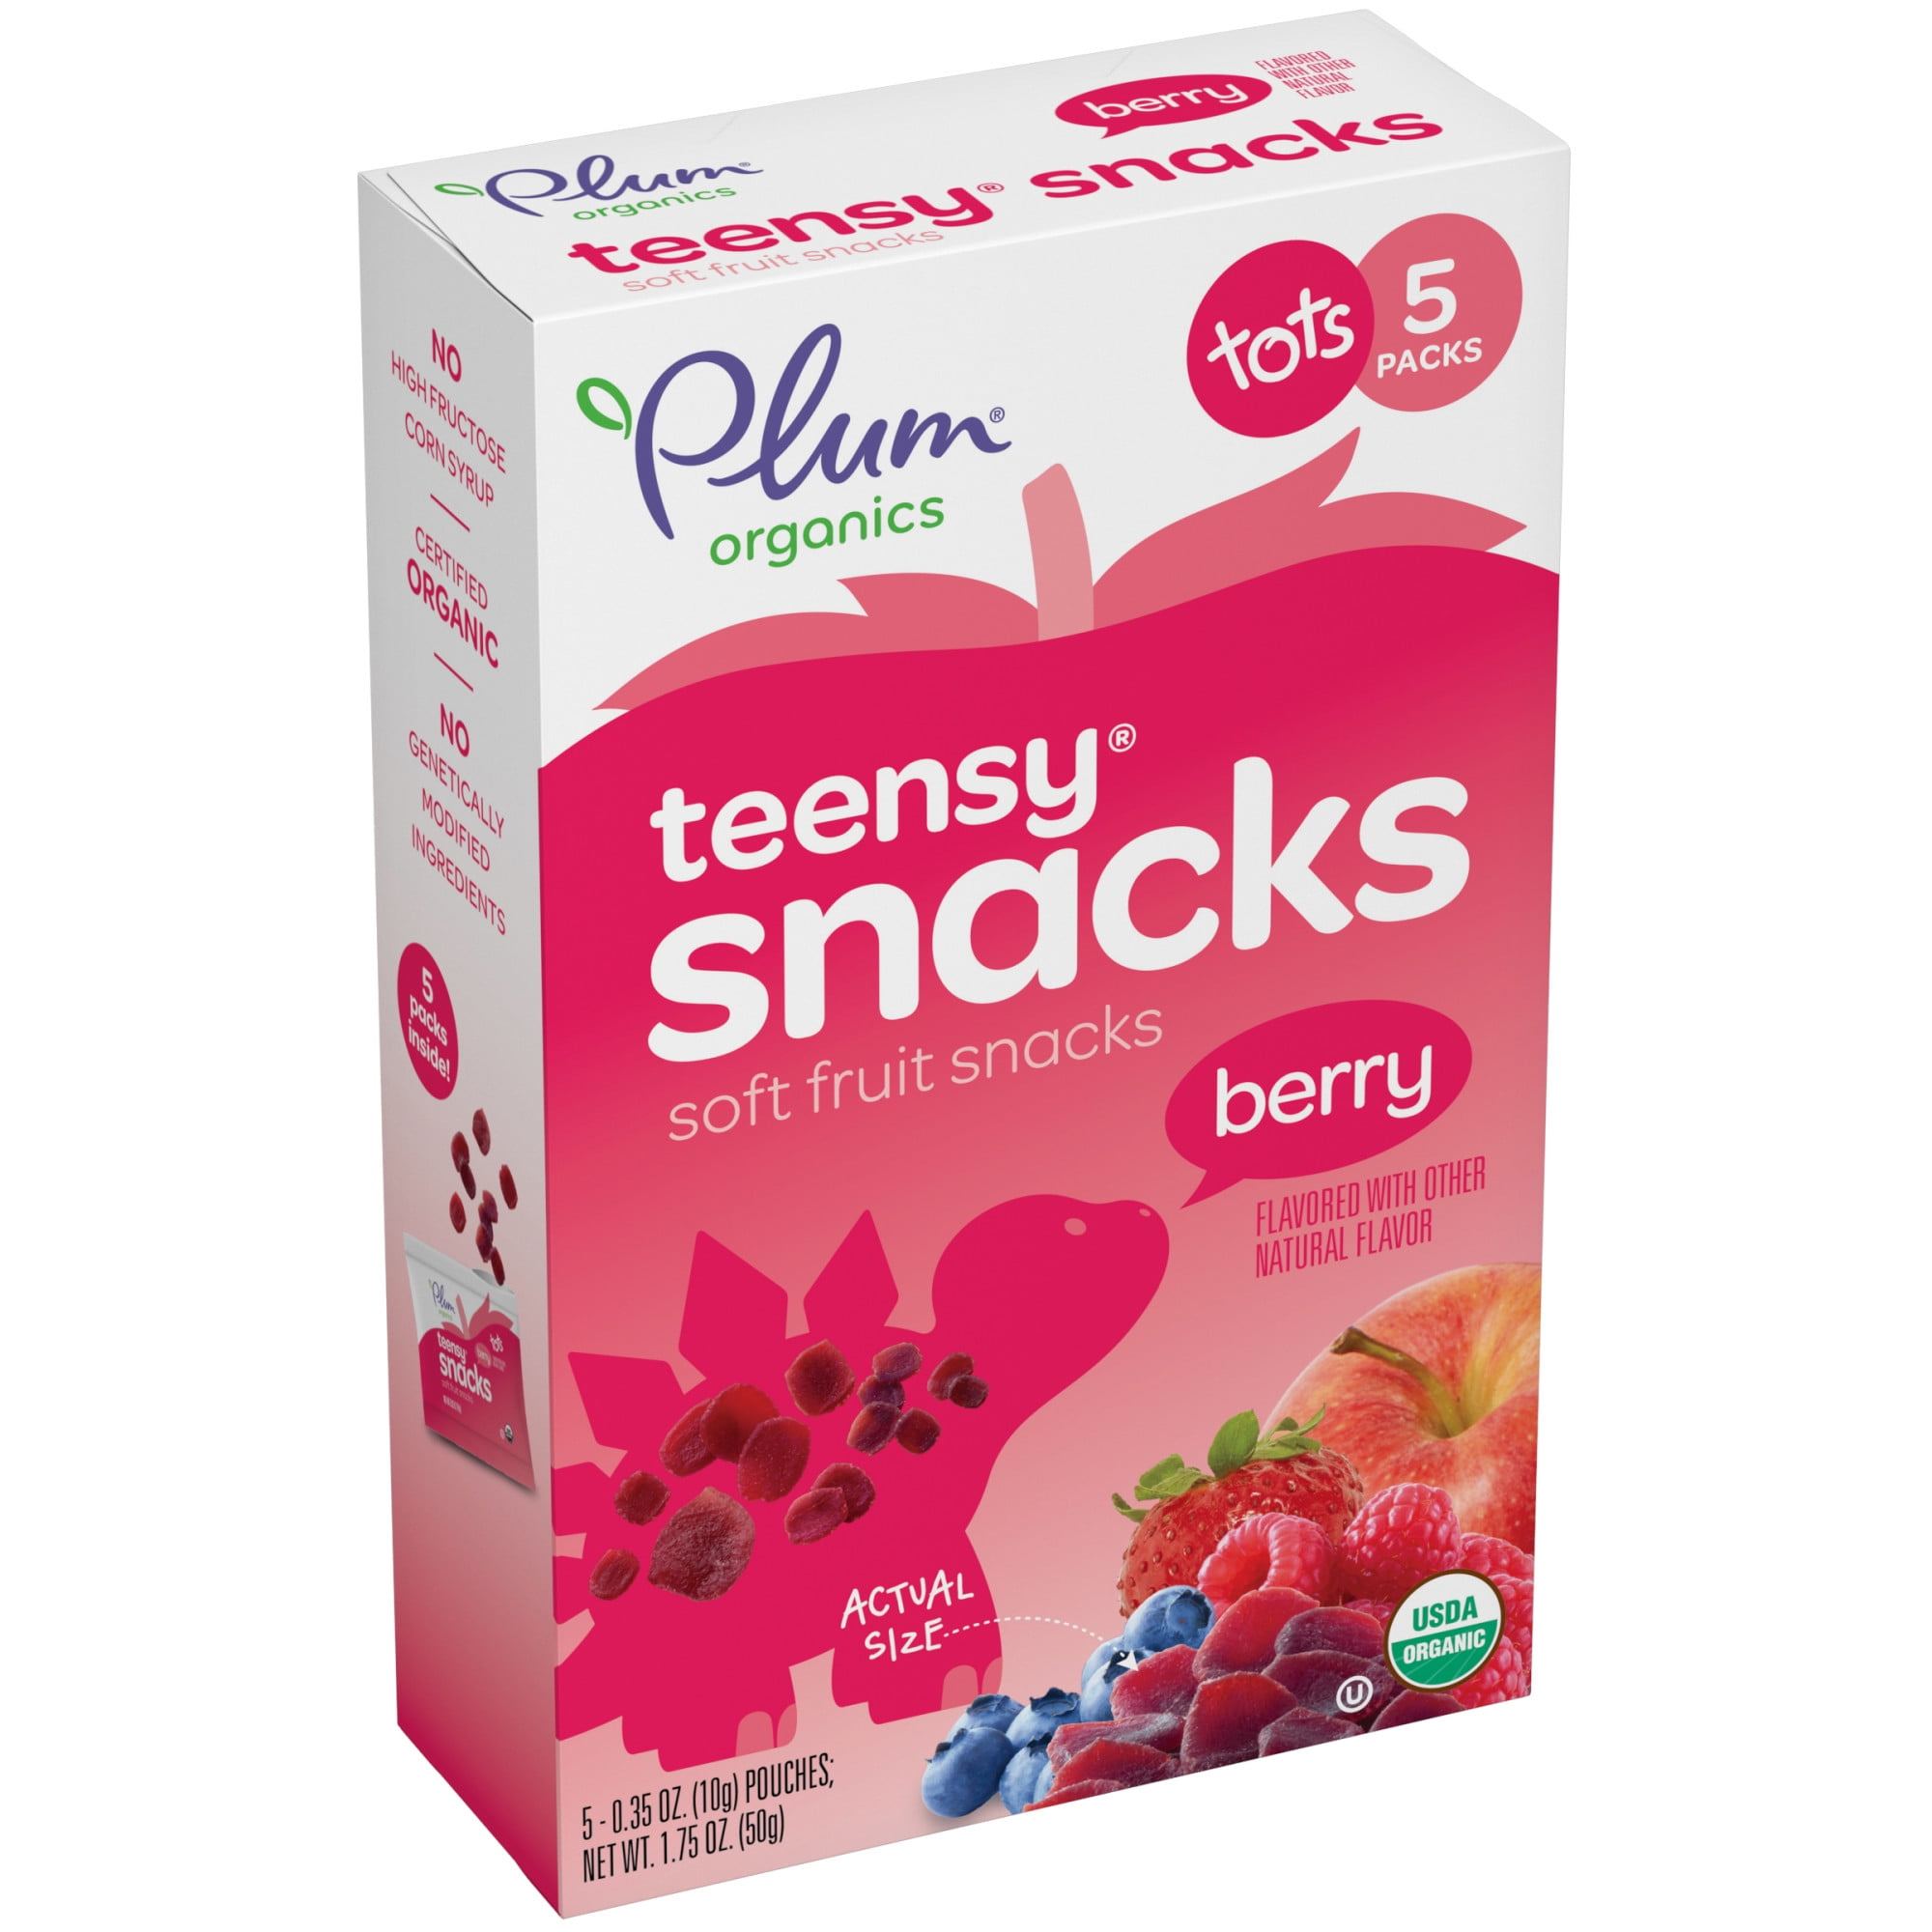 Plum Organics Teensy Snacks Soft Fruit Snacks for Toddlers: Berry - 5 Ct, Baby Food